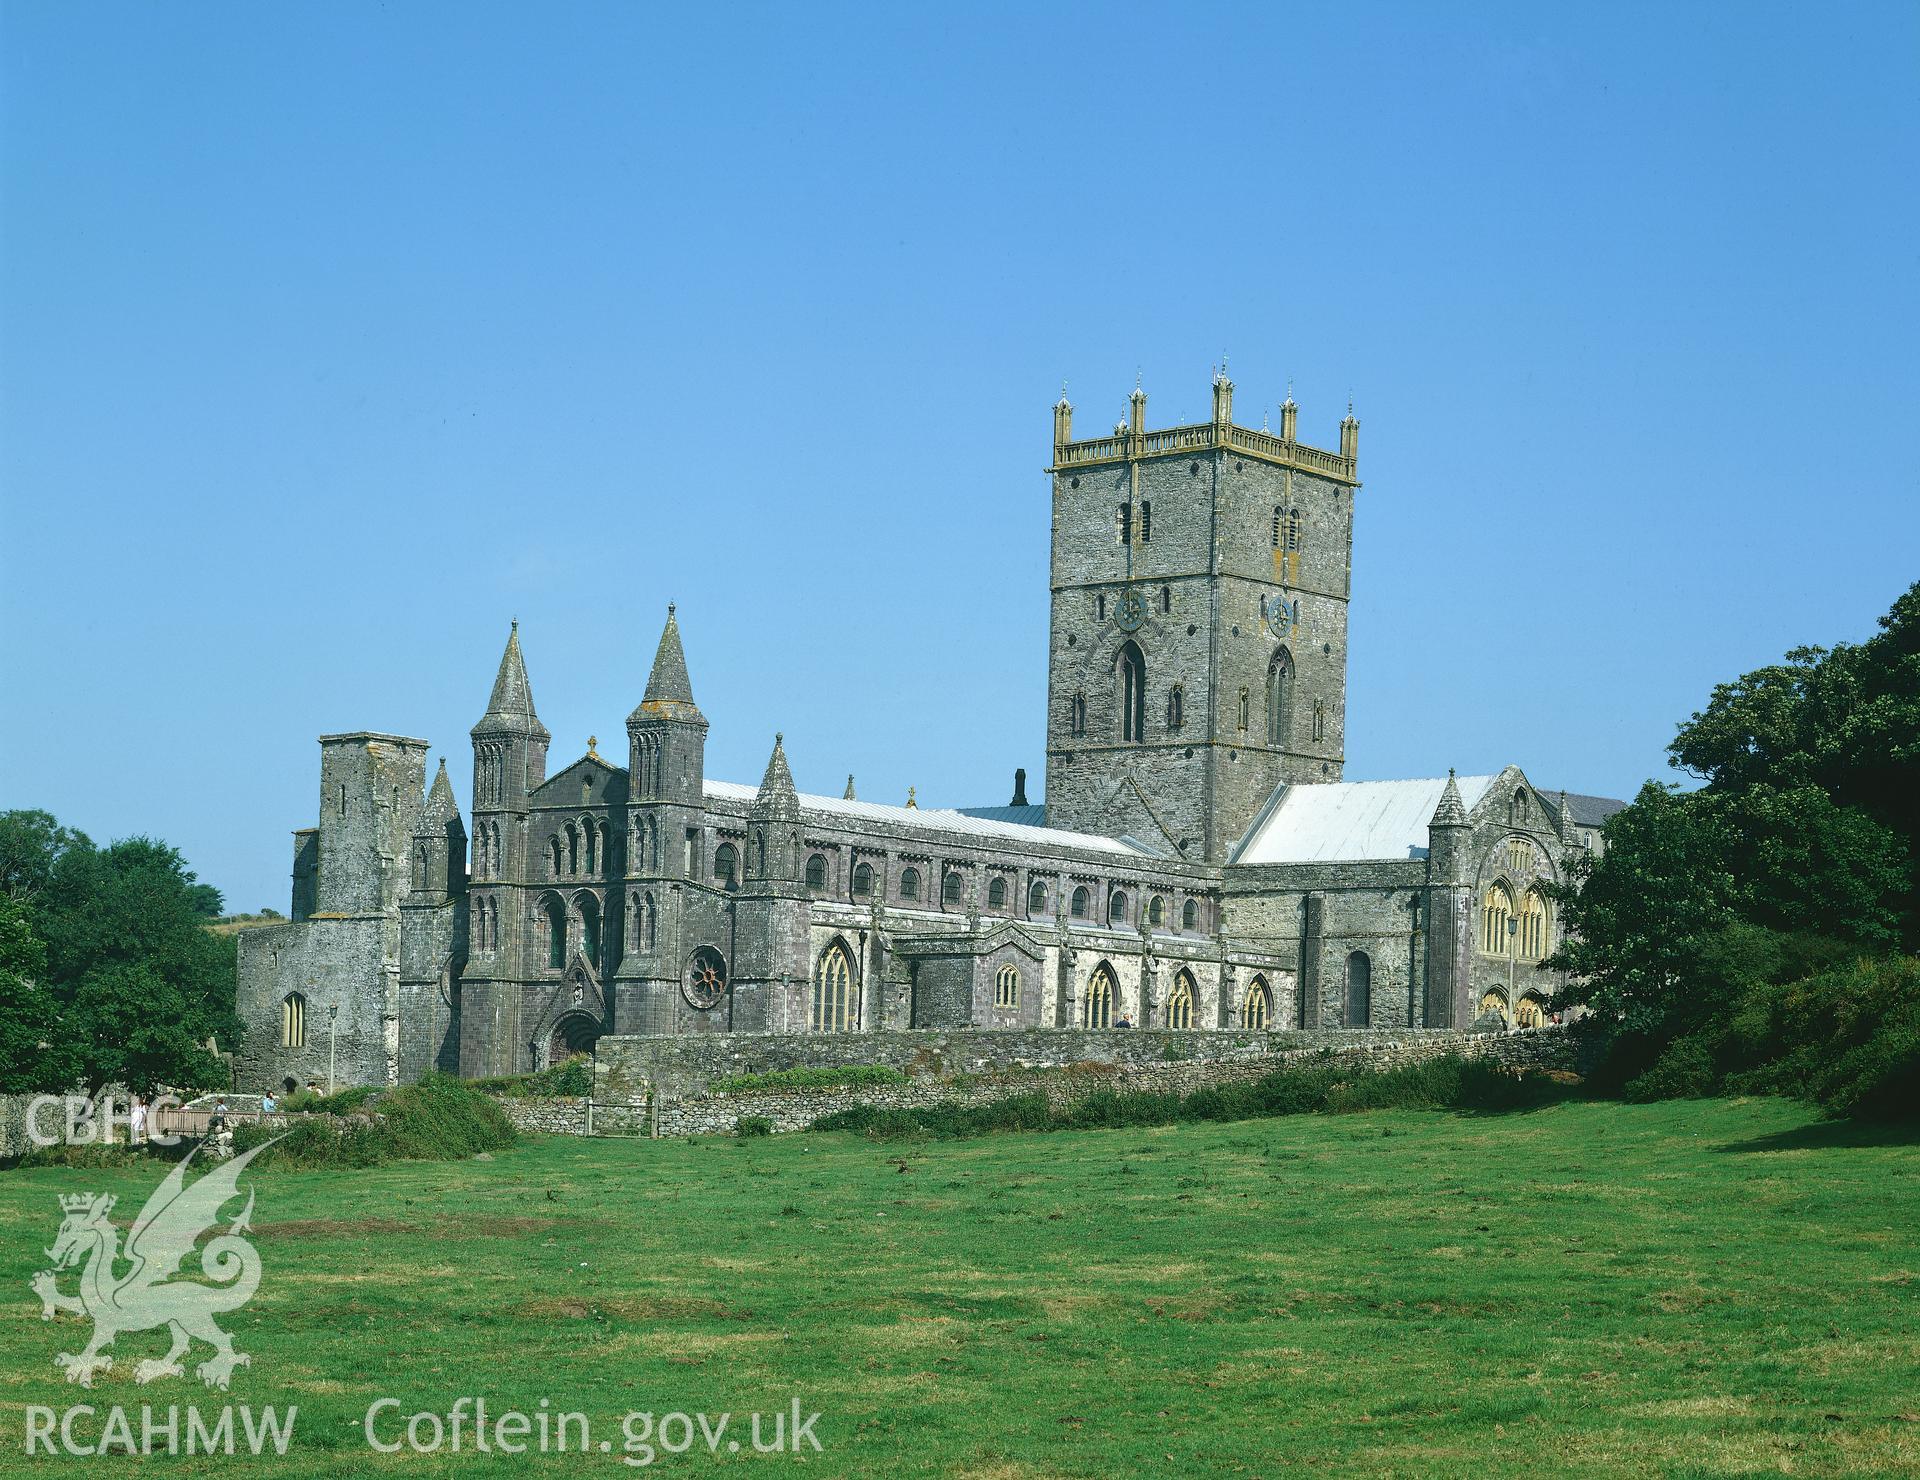 RCAHMW colour transparency of an exterior view of St David's Cathedral.